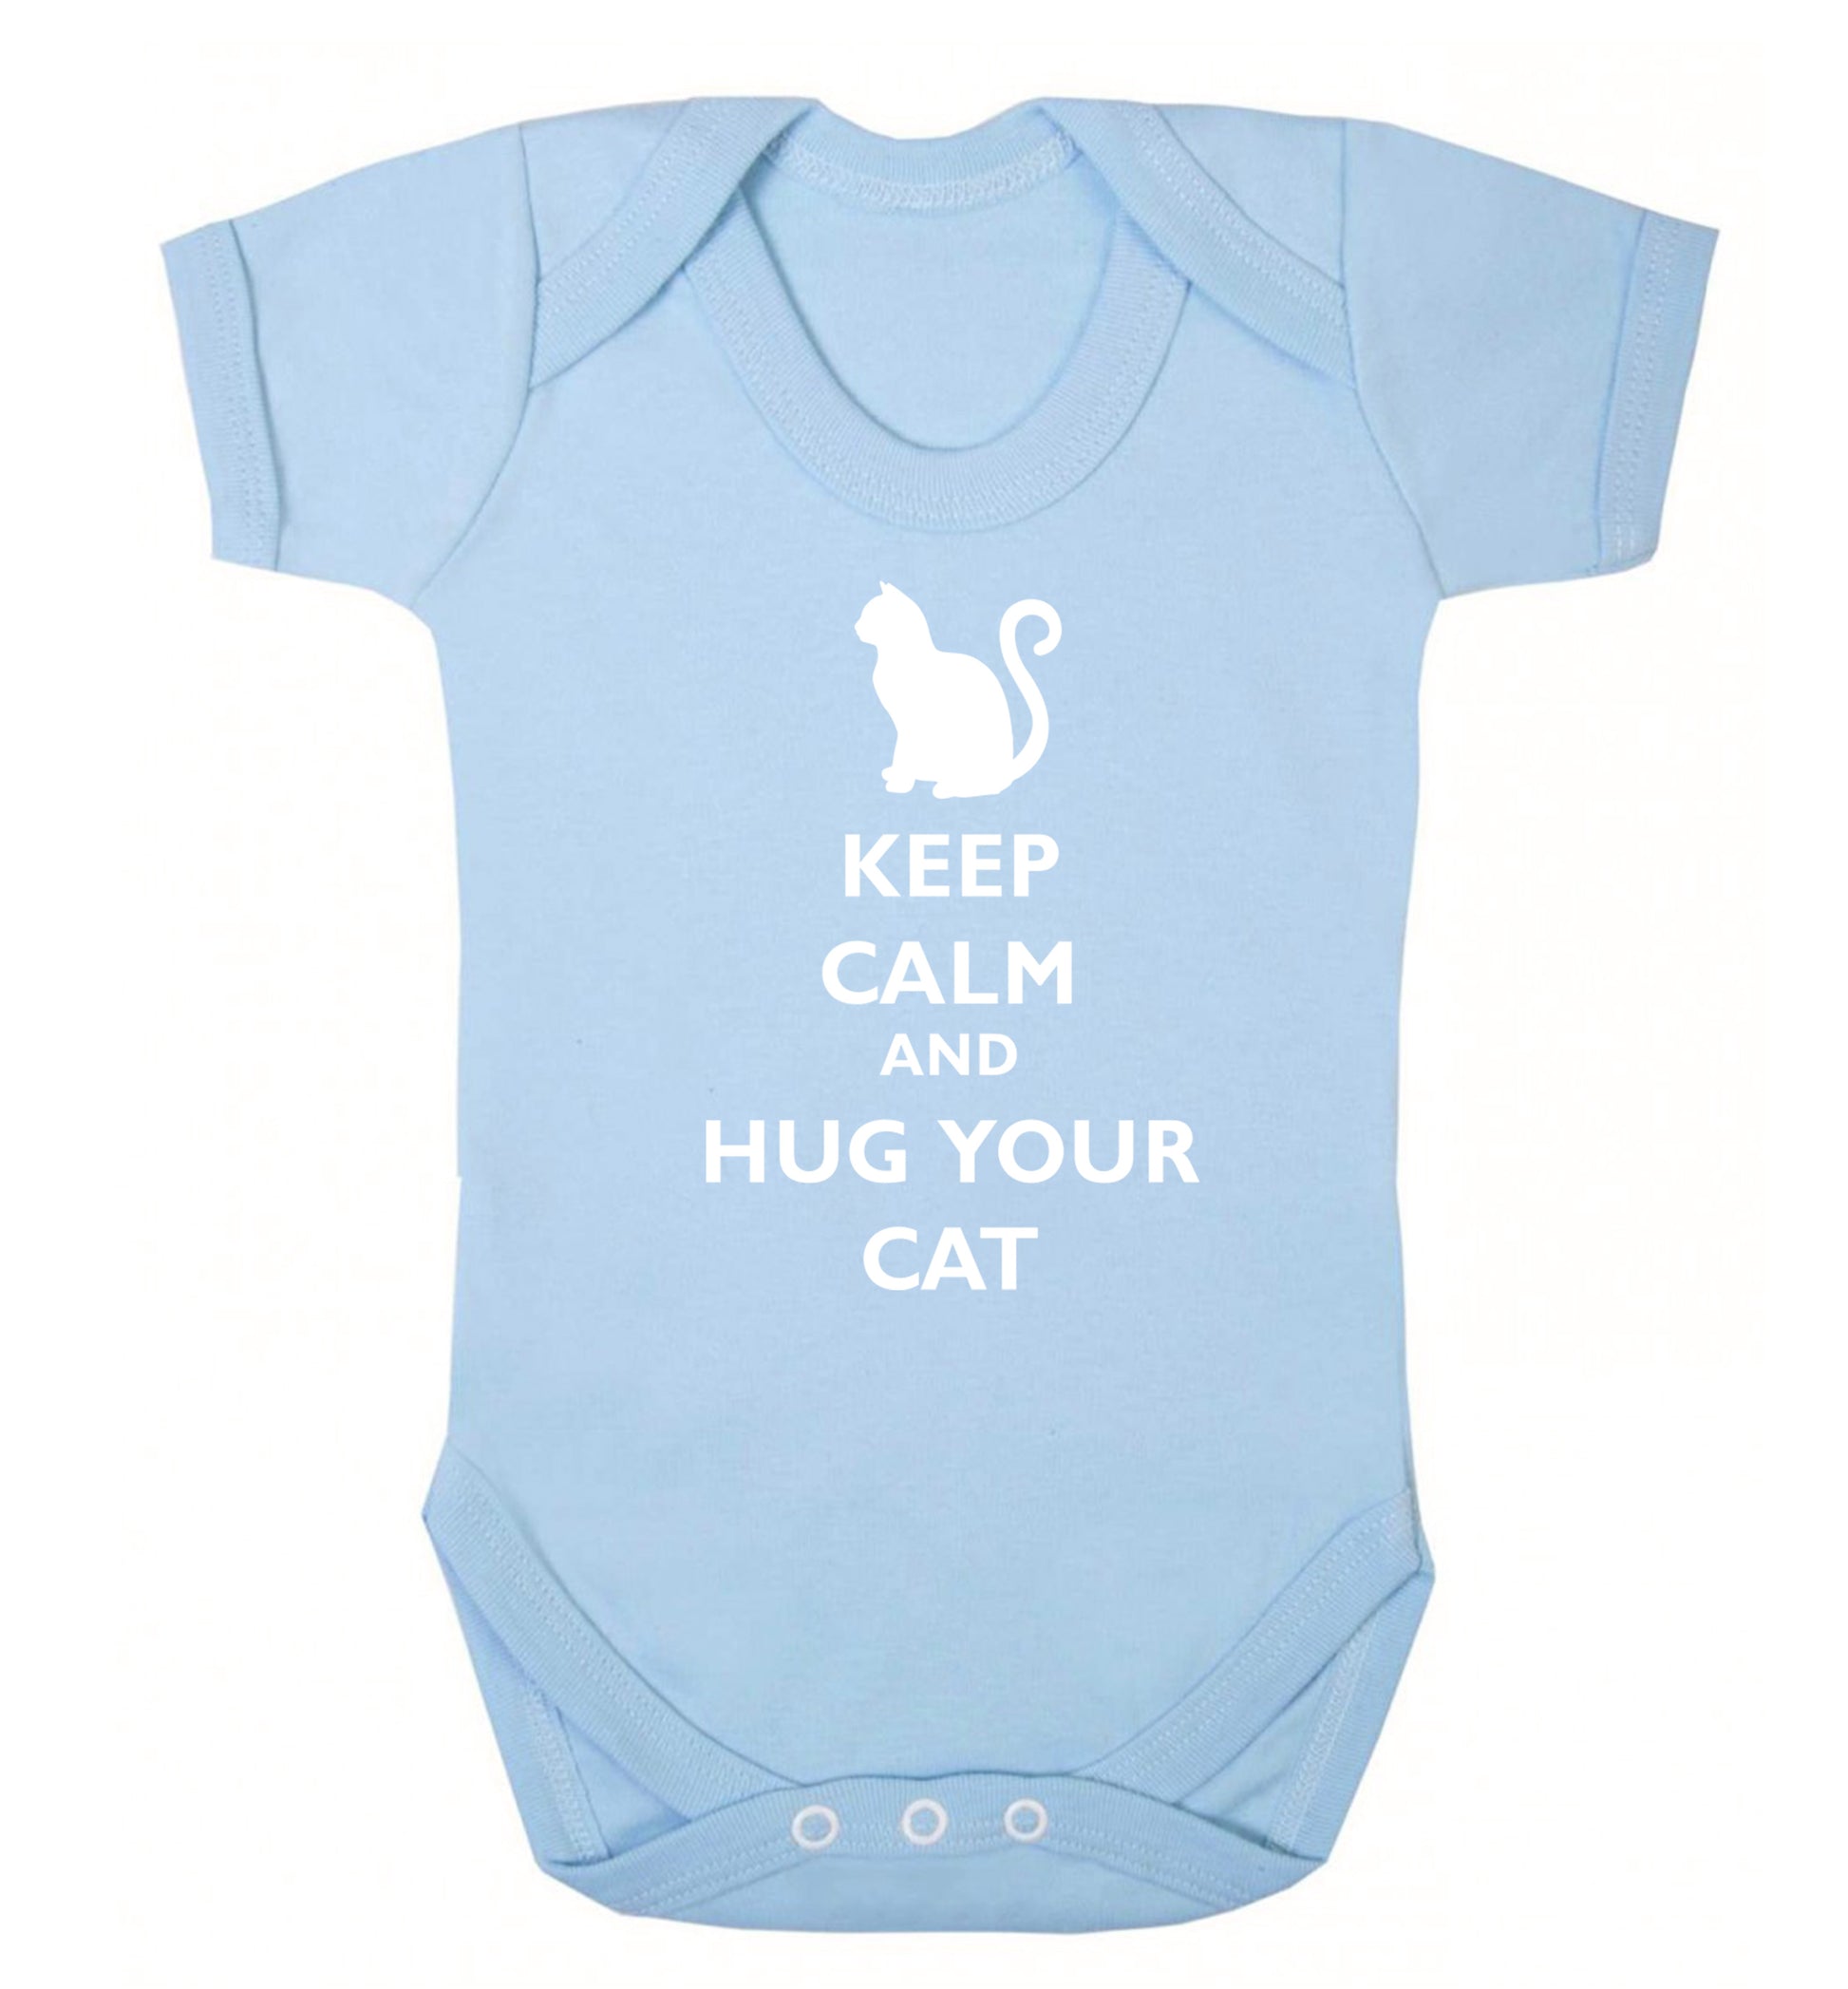 Keep calm and hug your cat Baby Vest pale blue 18-24 months